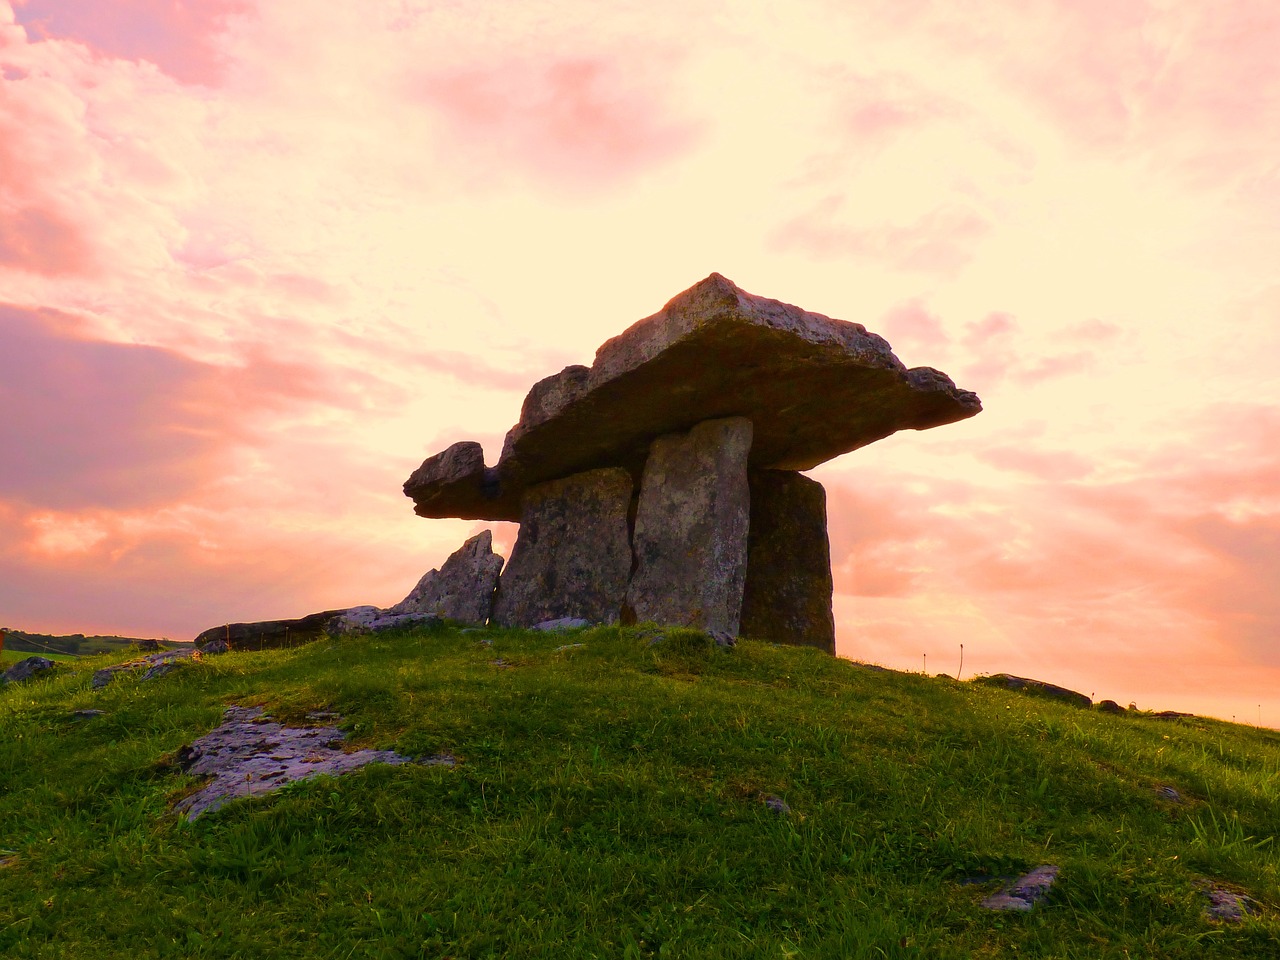 a large rock sitting on top of a lush green hillside, a picture, romanticism, ancient irish, stone table, godrays at sunset, portal